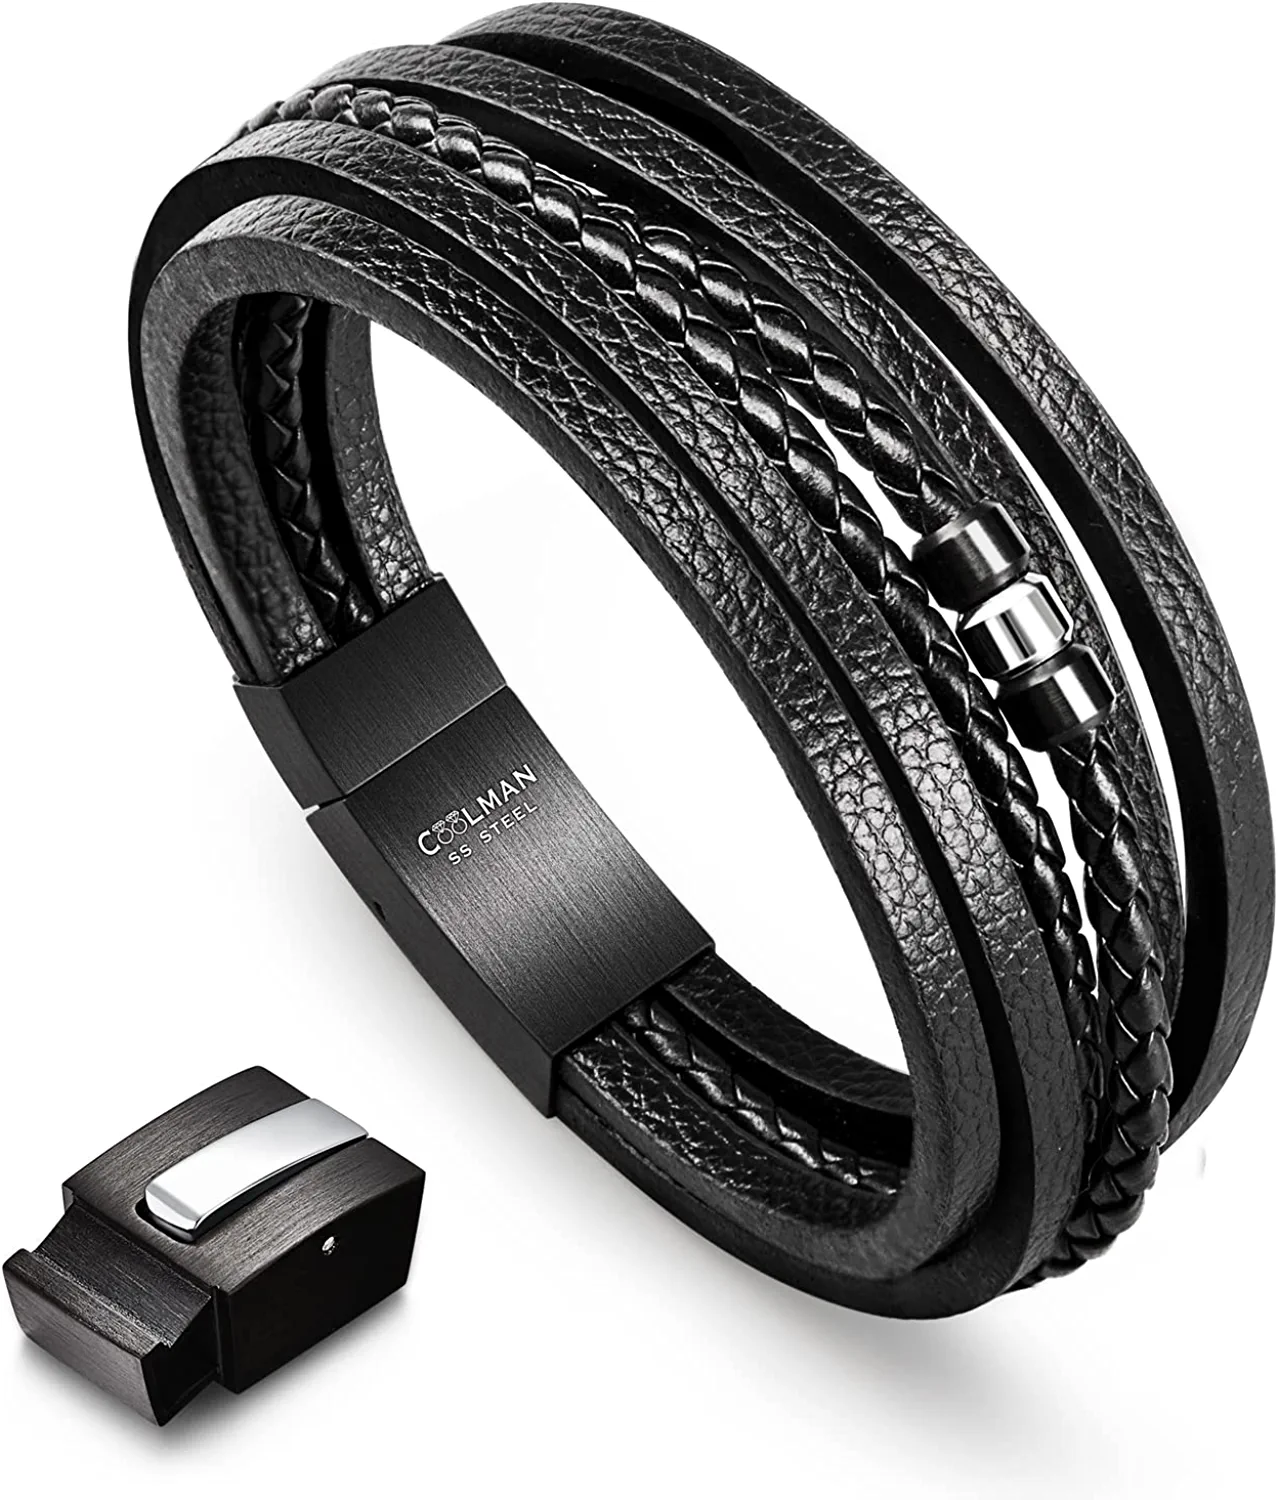 Coolman Leather Bracelet for Men Stainless Steel Braided Cuff Bracelet with Carbon Fibre Bead Magnetic Clasp